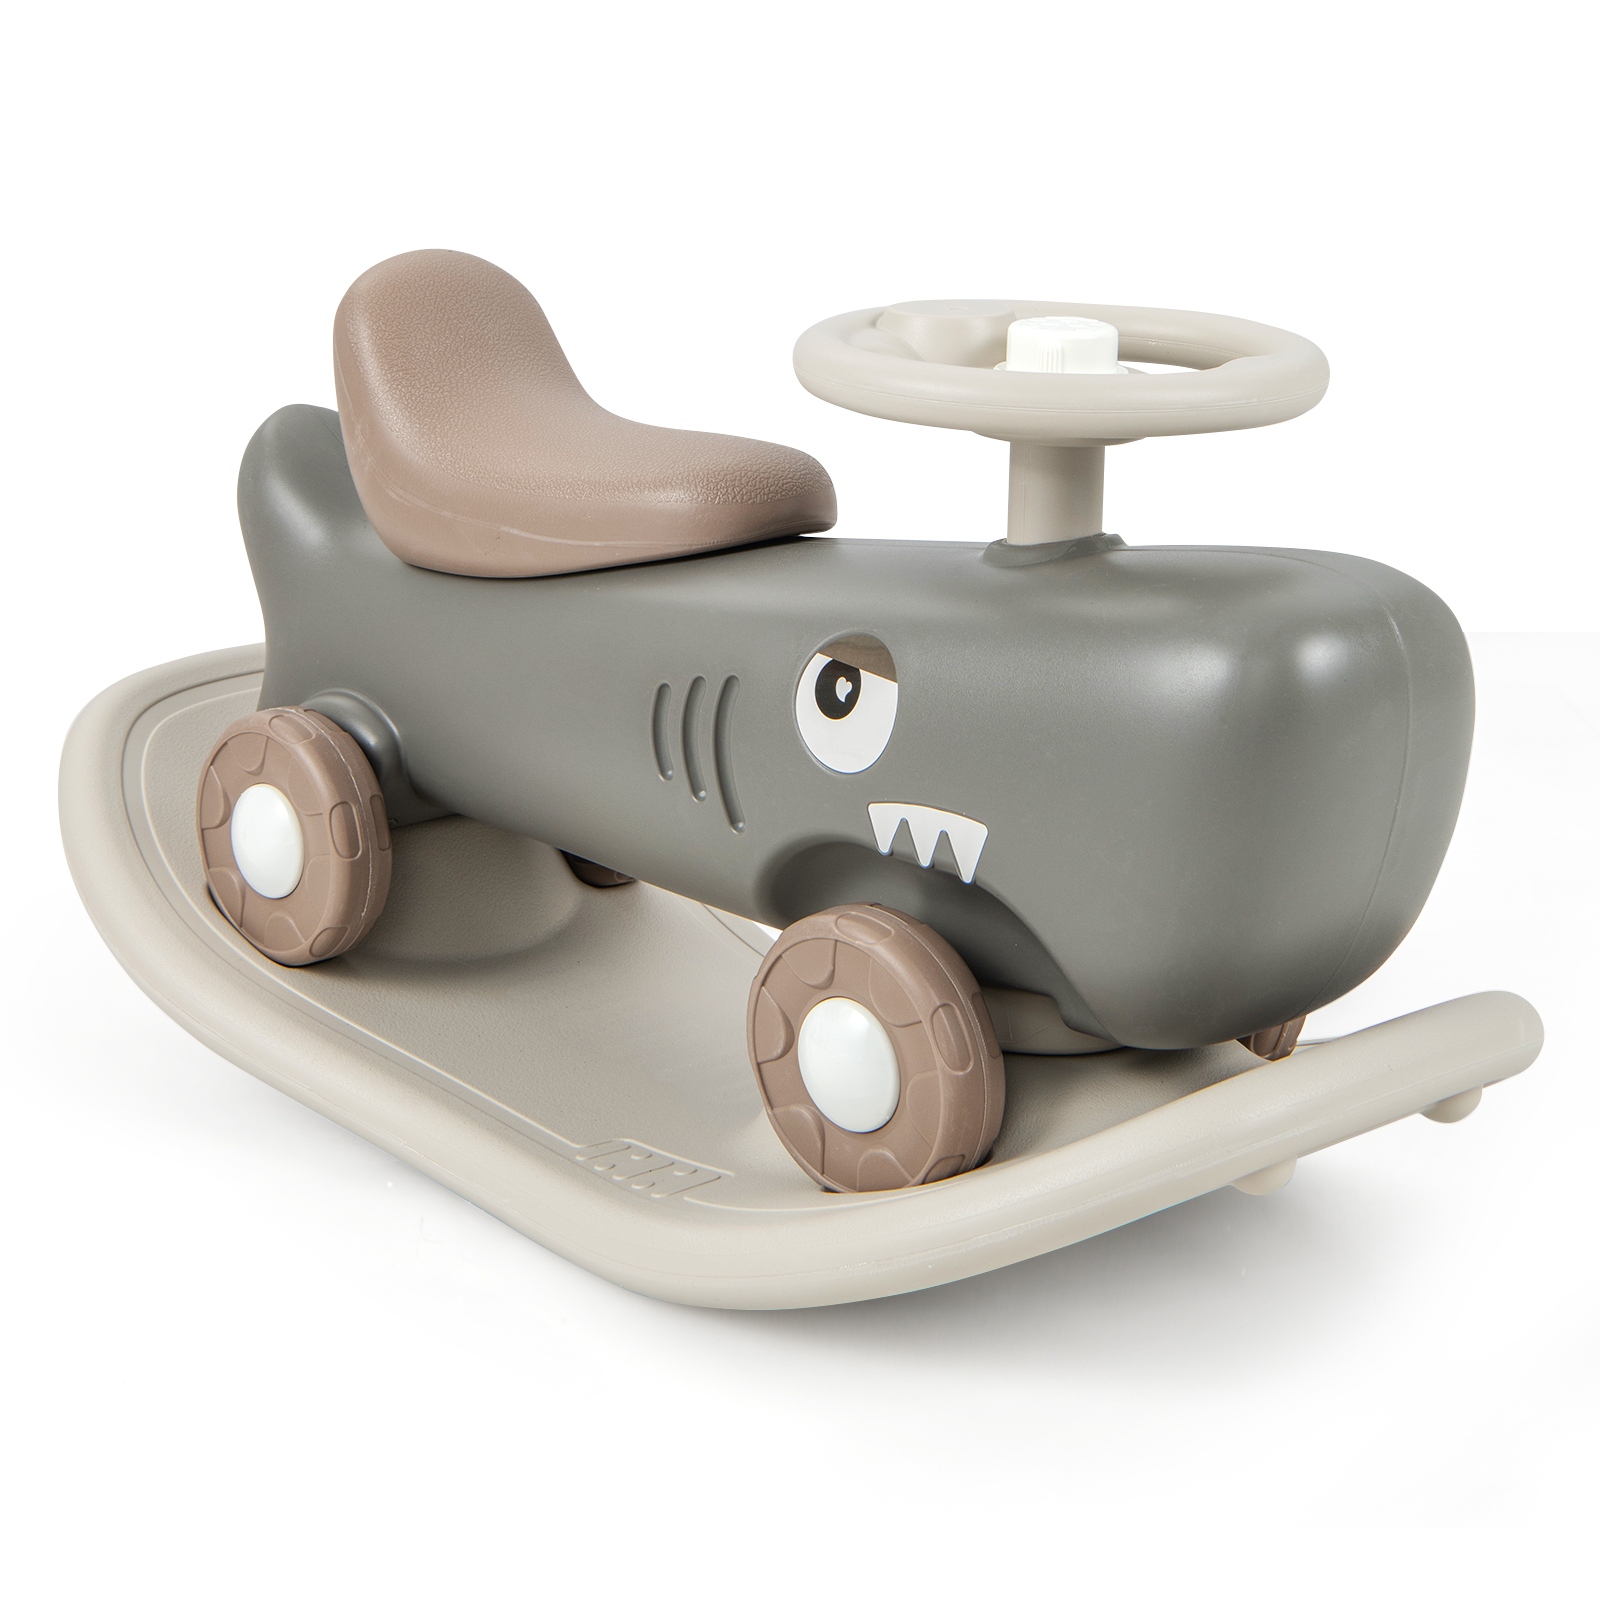 Kids 3-in-1 Convertible Rocking Horse and Sliding Car for Indoor Outdoor Use-Grey